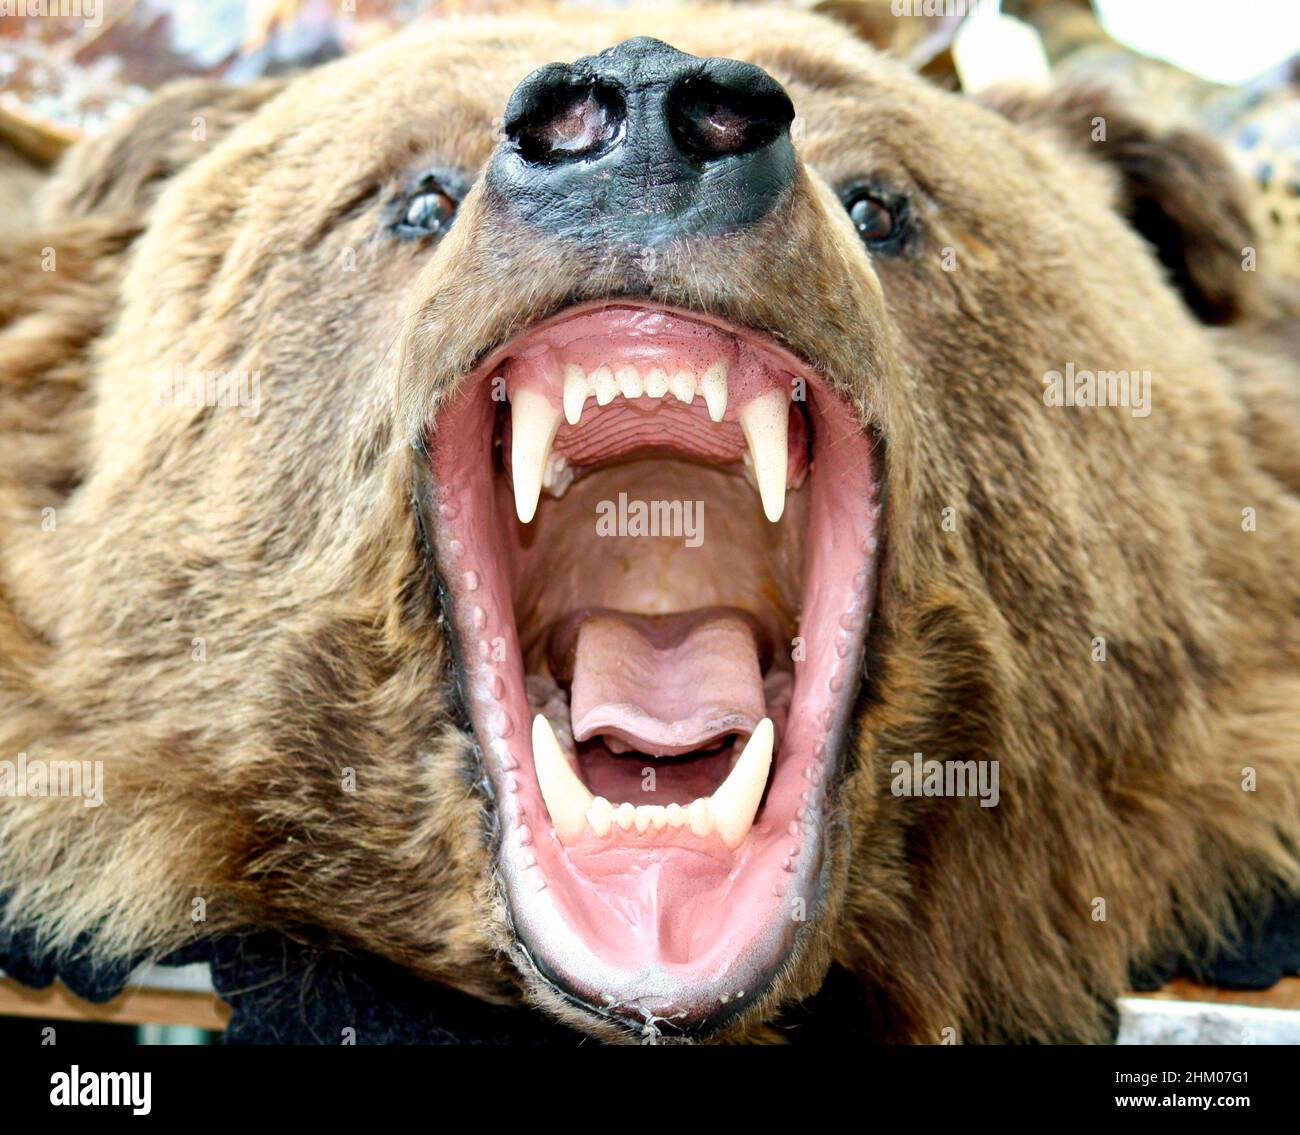 Grizzly Bear Stock Photo